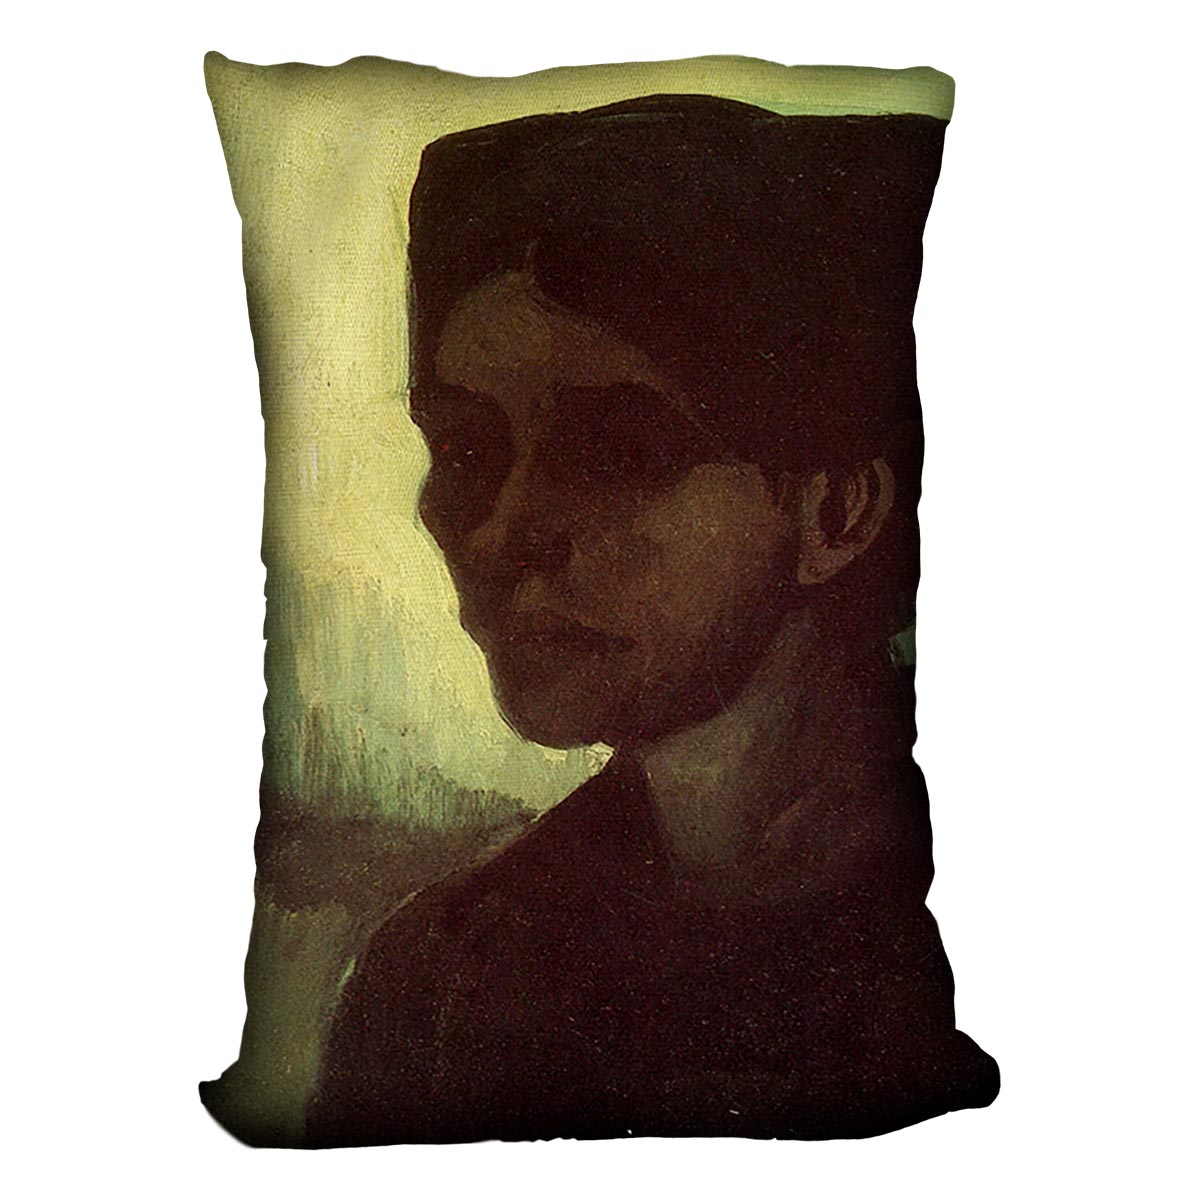 Head of a Young Peasant Woman with Dark Cap by Van Gogh Cushion